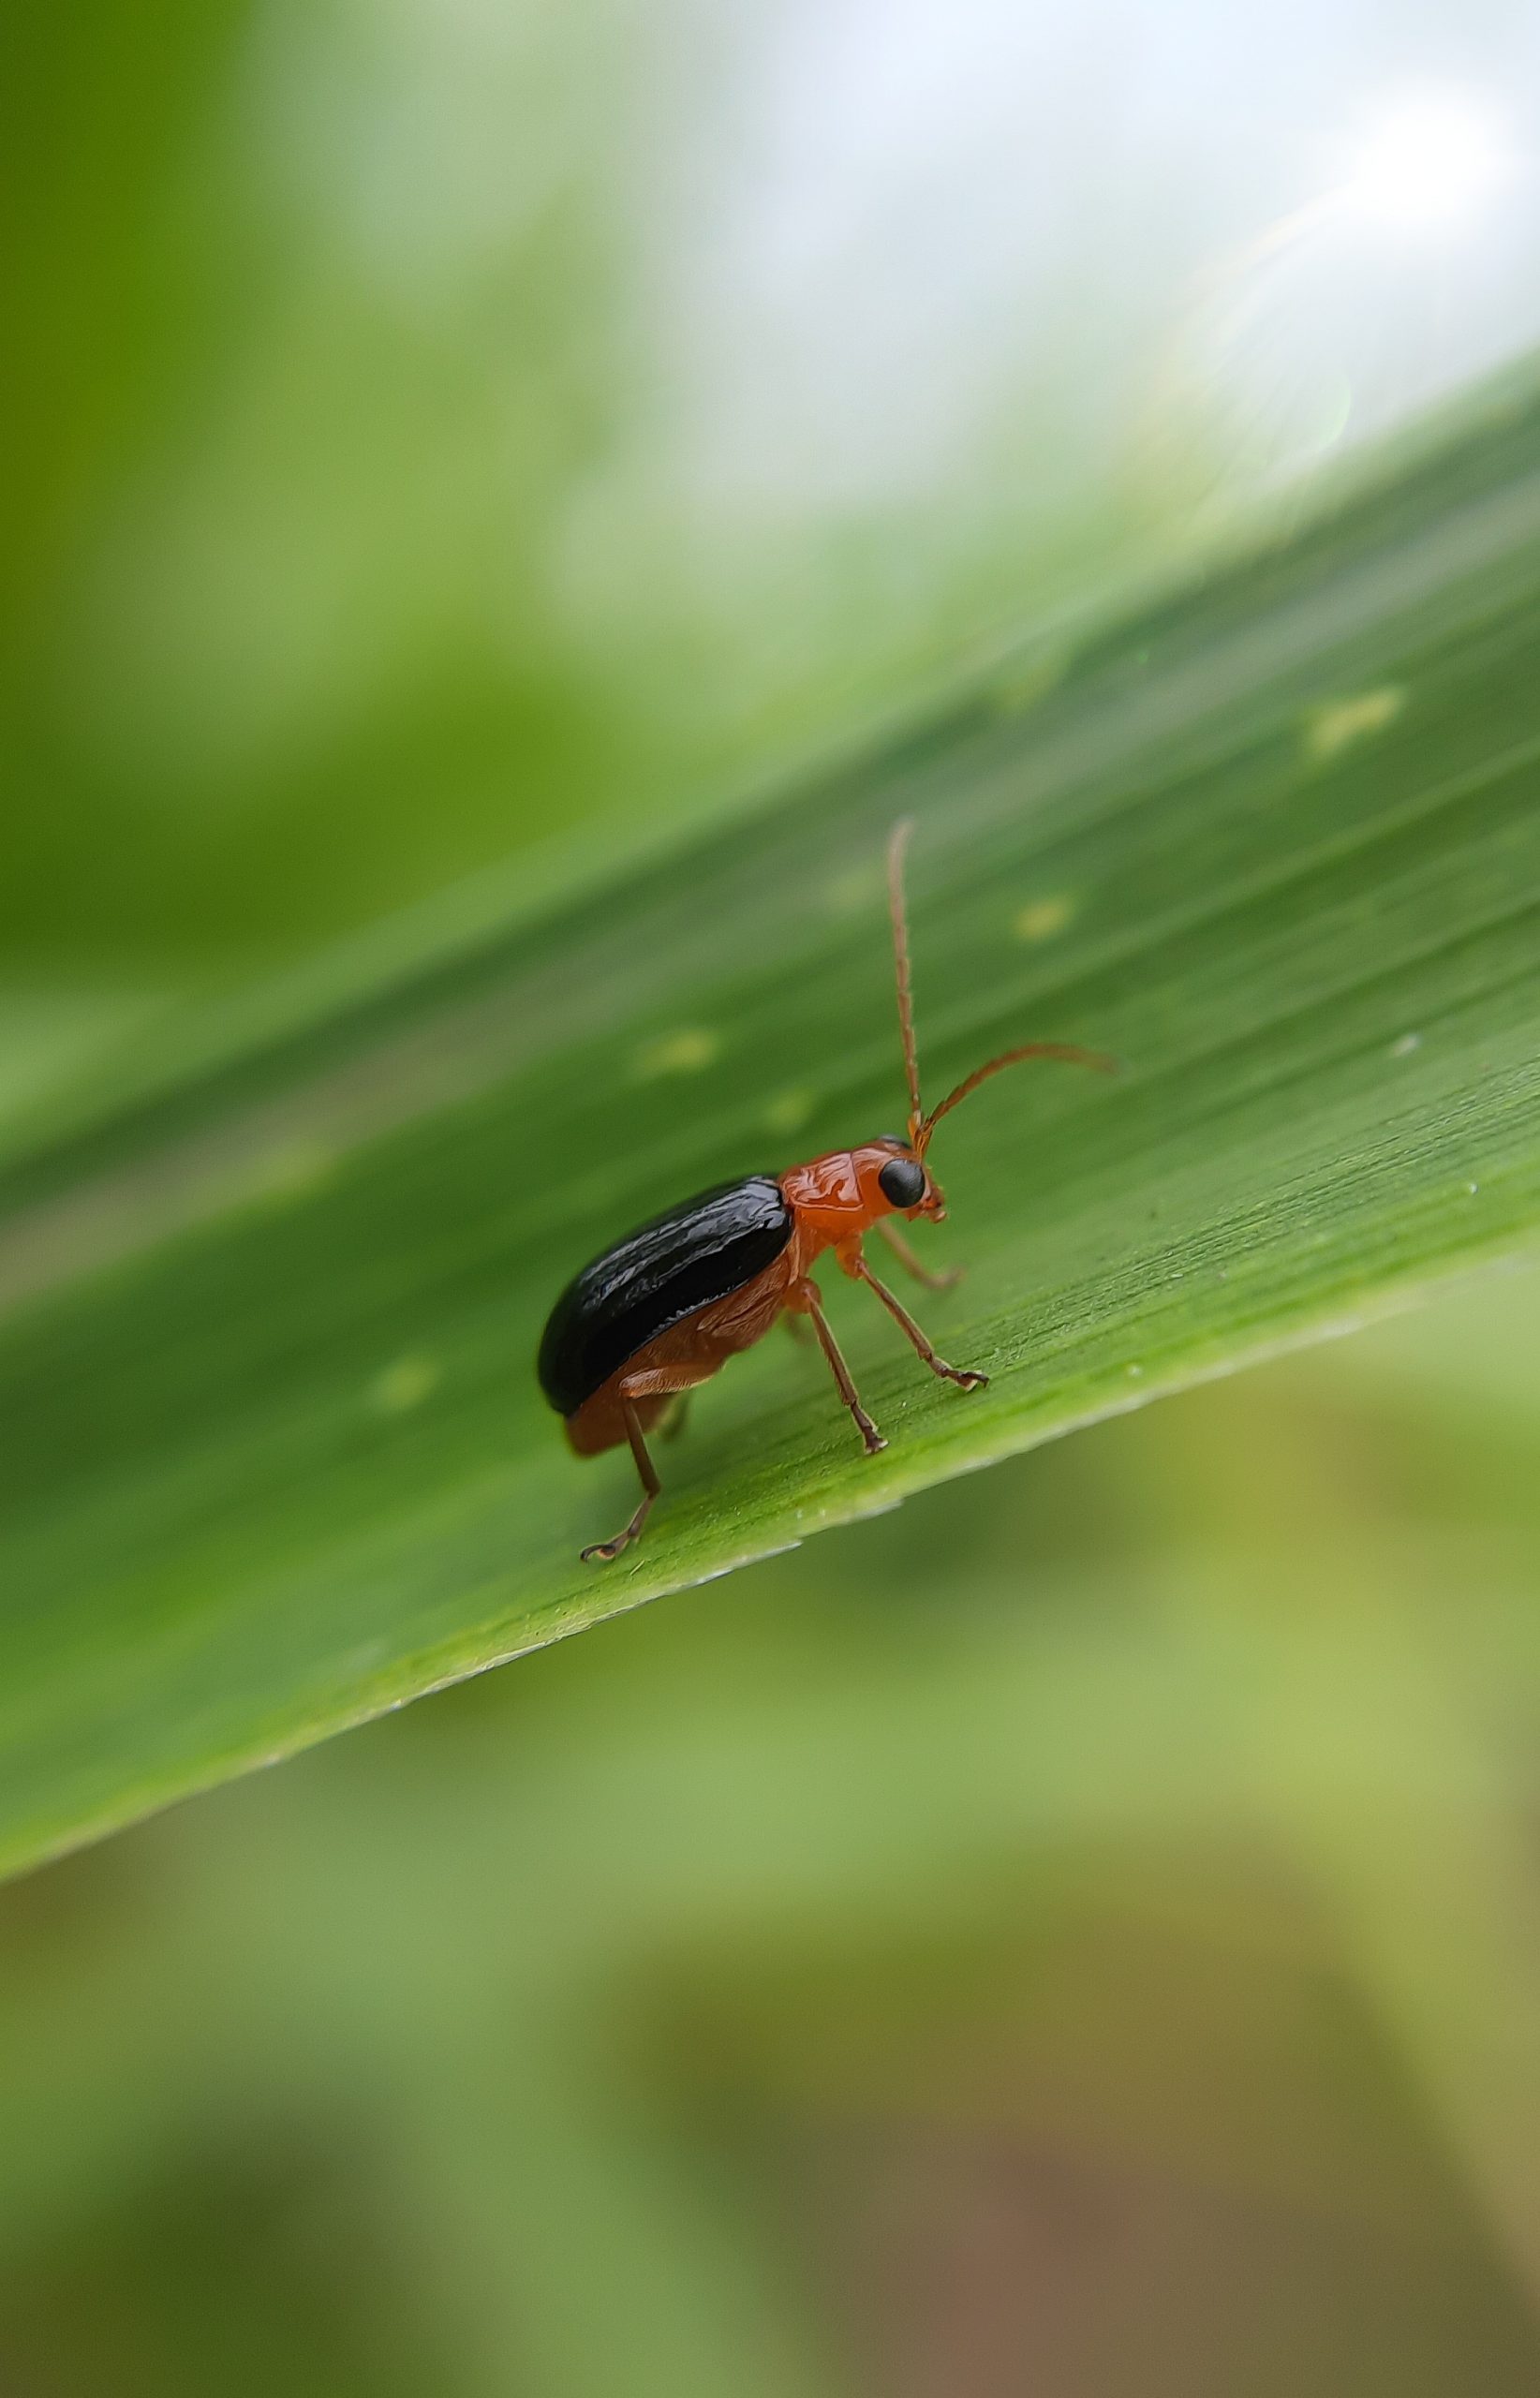 An insect on a leaf